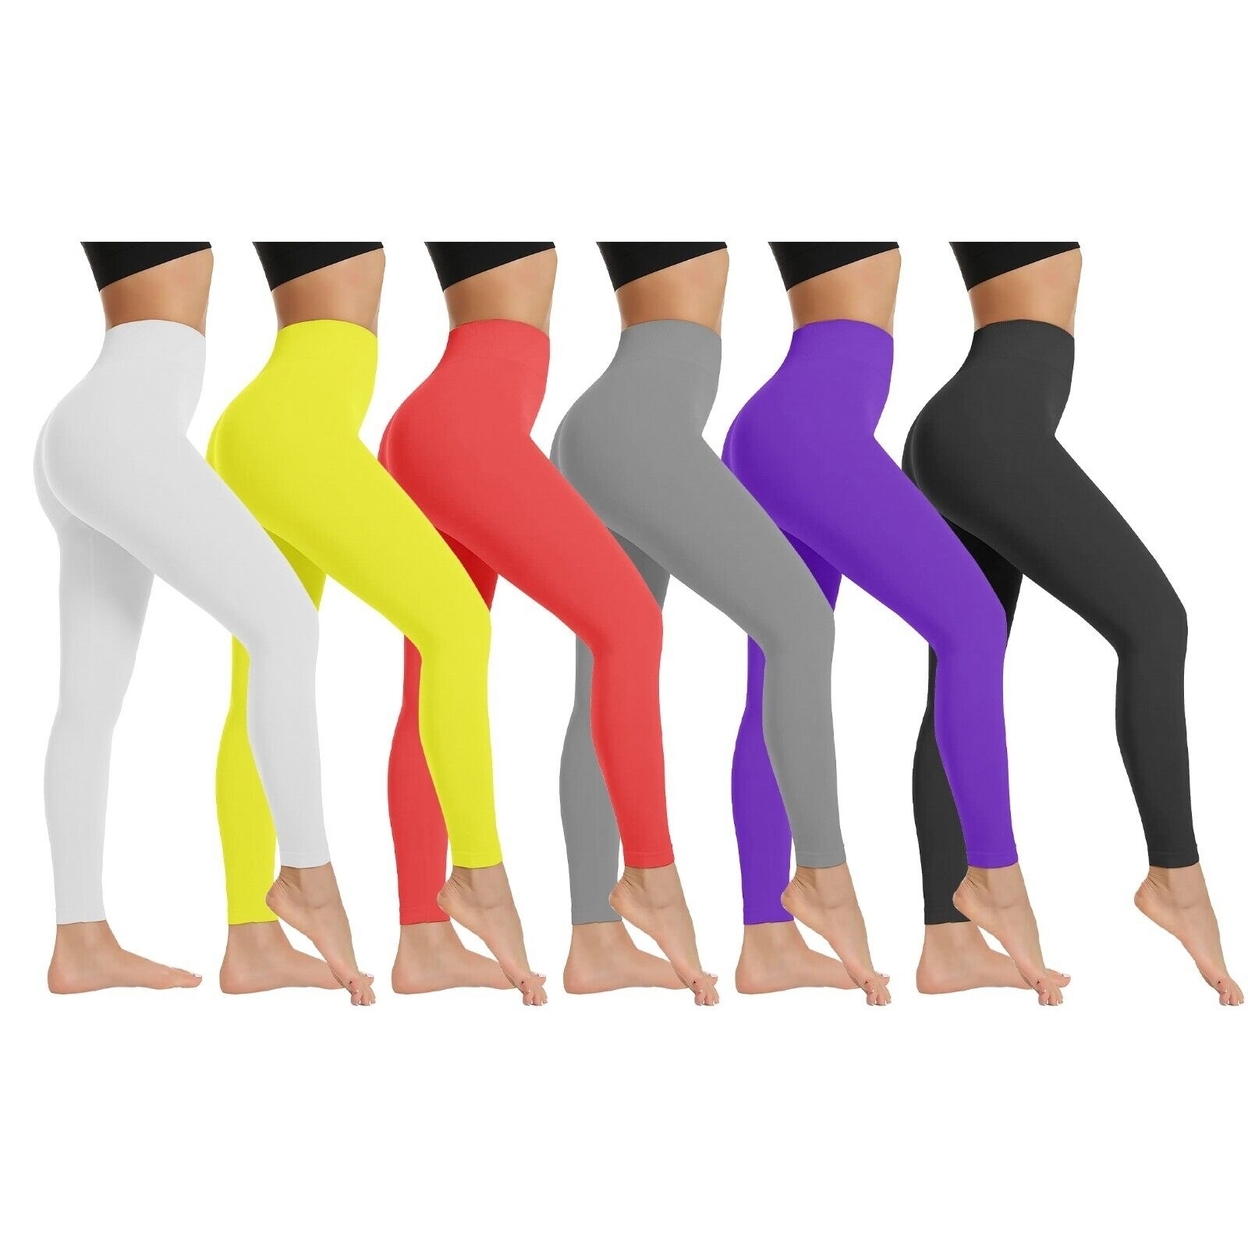 3-Pack: Women's High Waist Super Soft Active Athlete Stretch Yoga Cozy Leggings - Yellow,yellow,yellow,, X-small